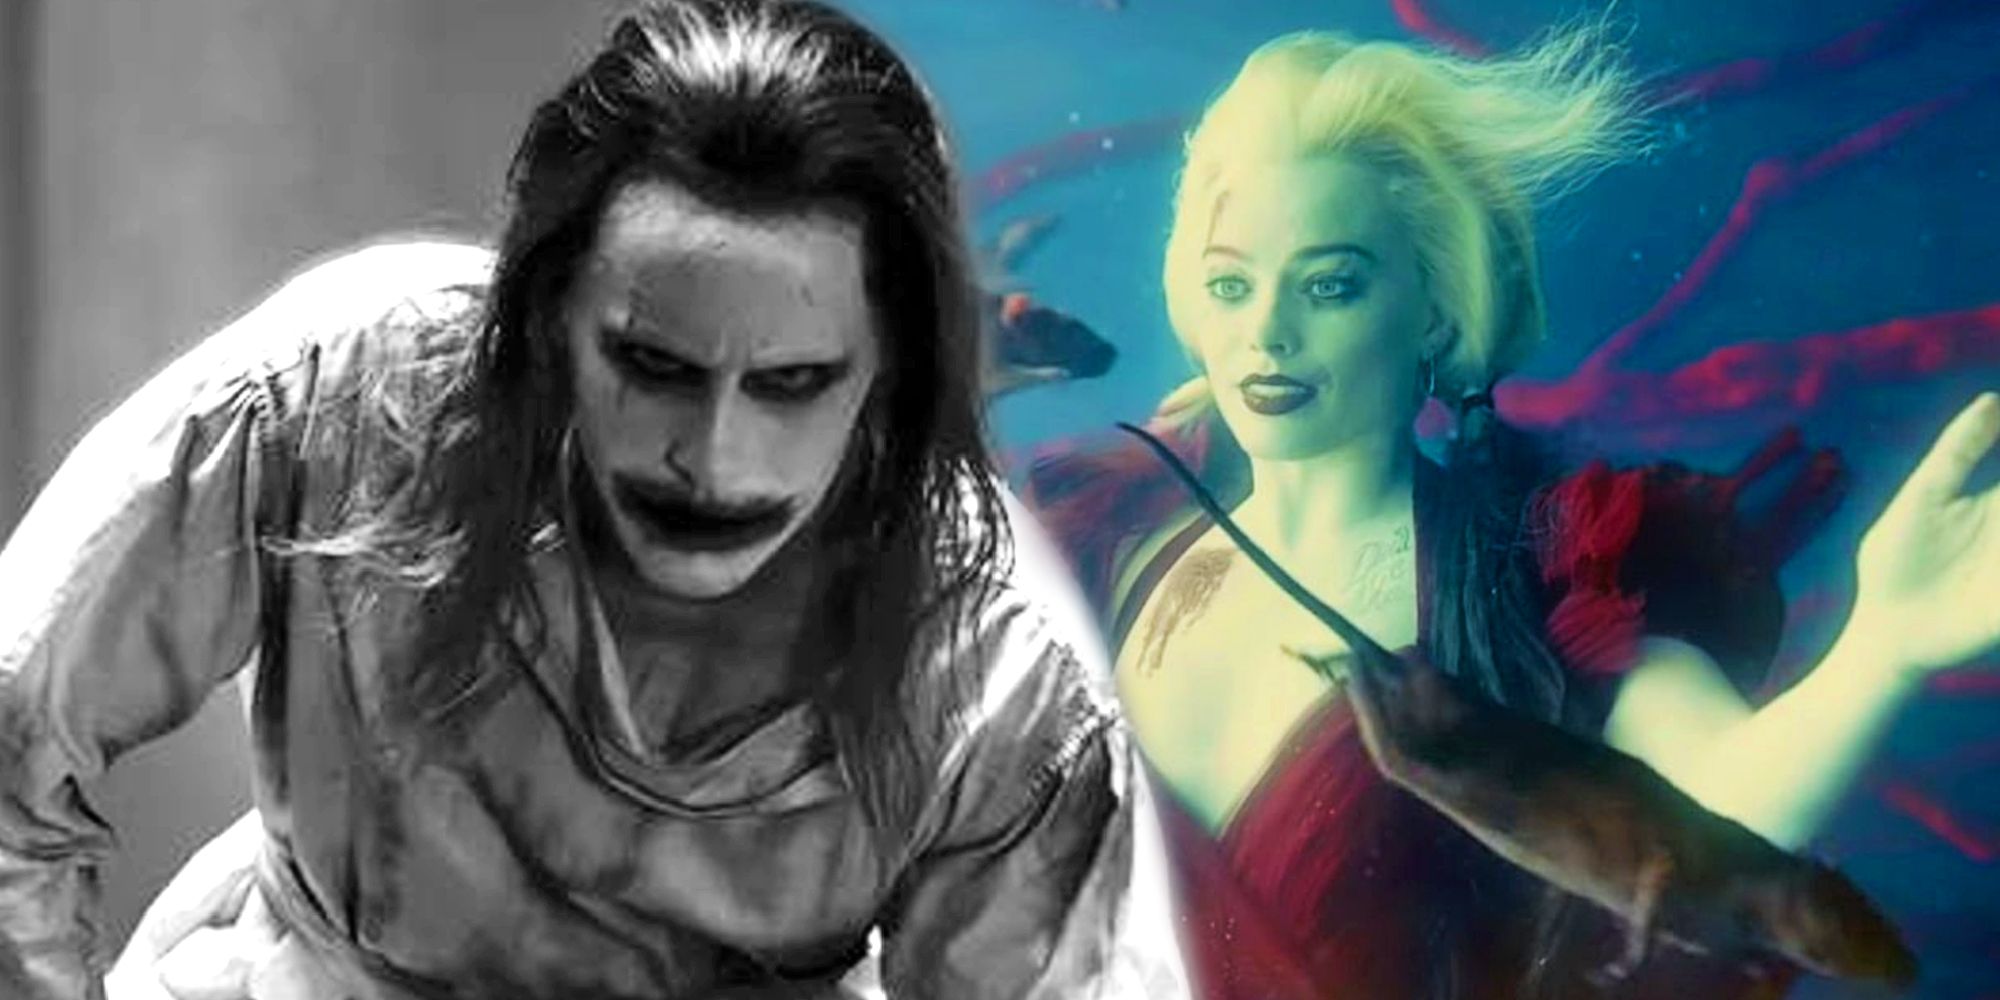 Harley Quinn in The Suicide Squad and the Joker in Zack Snyder's Justice League